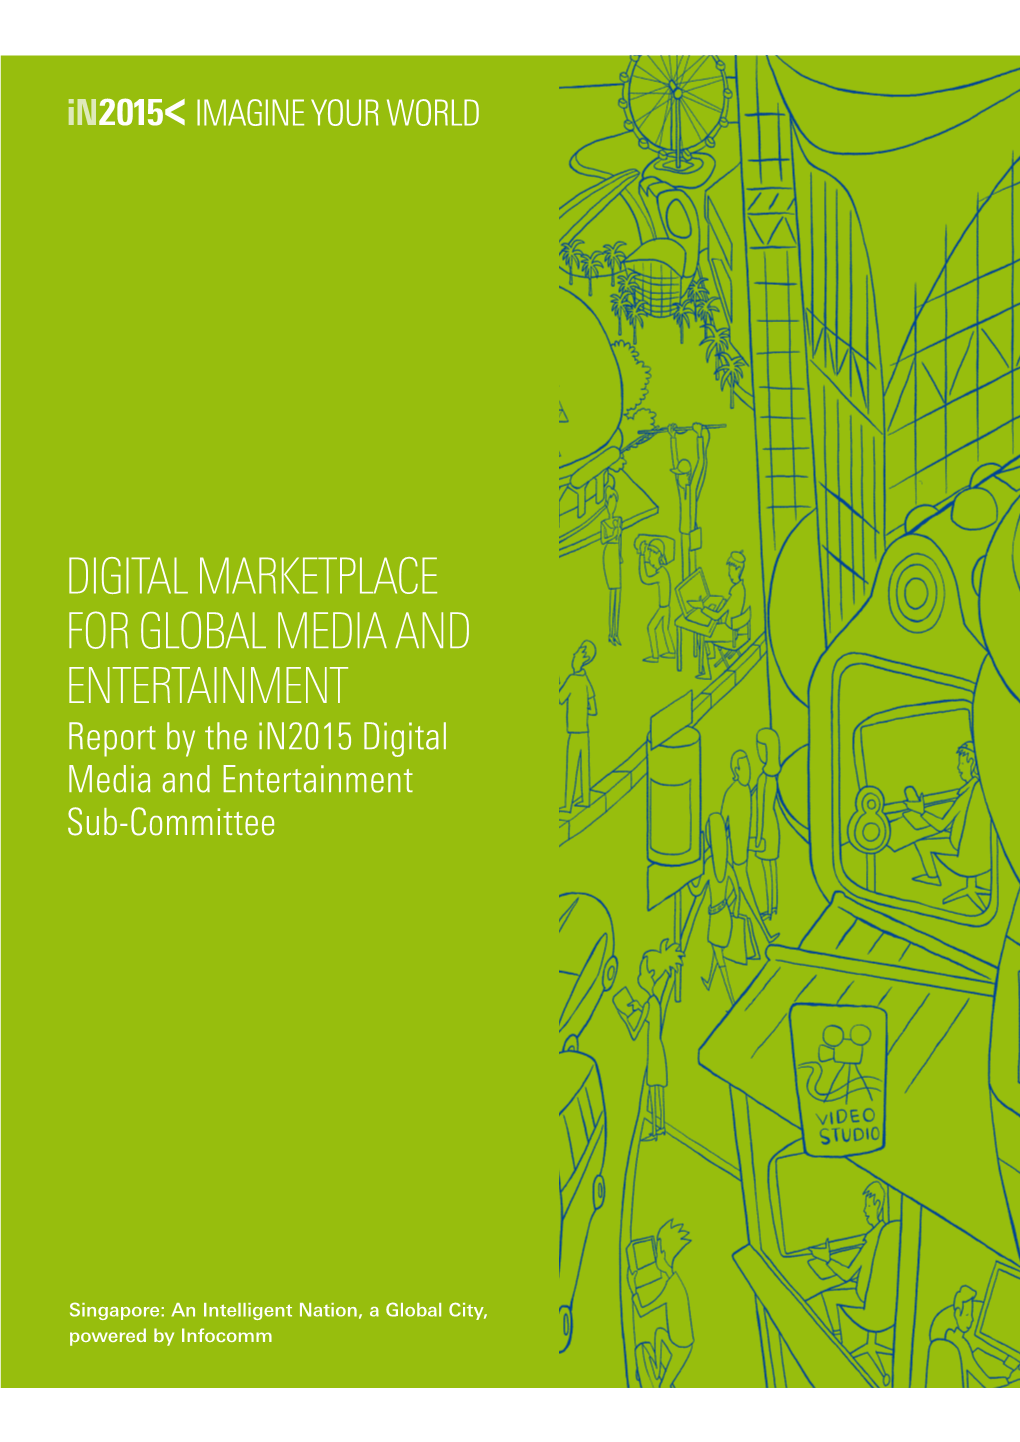 DIGITAL MARKETPLACE for GLOBAL MEDIA and ENTERTAINMENT Report by the In2015 Digital Media and Entertainment Sub-Committee